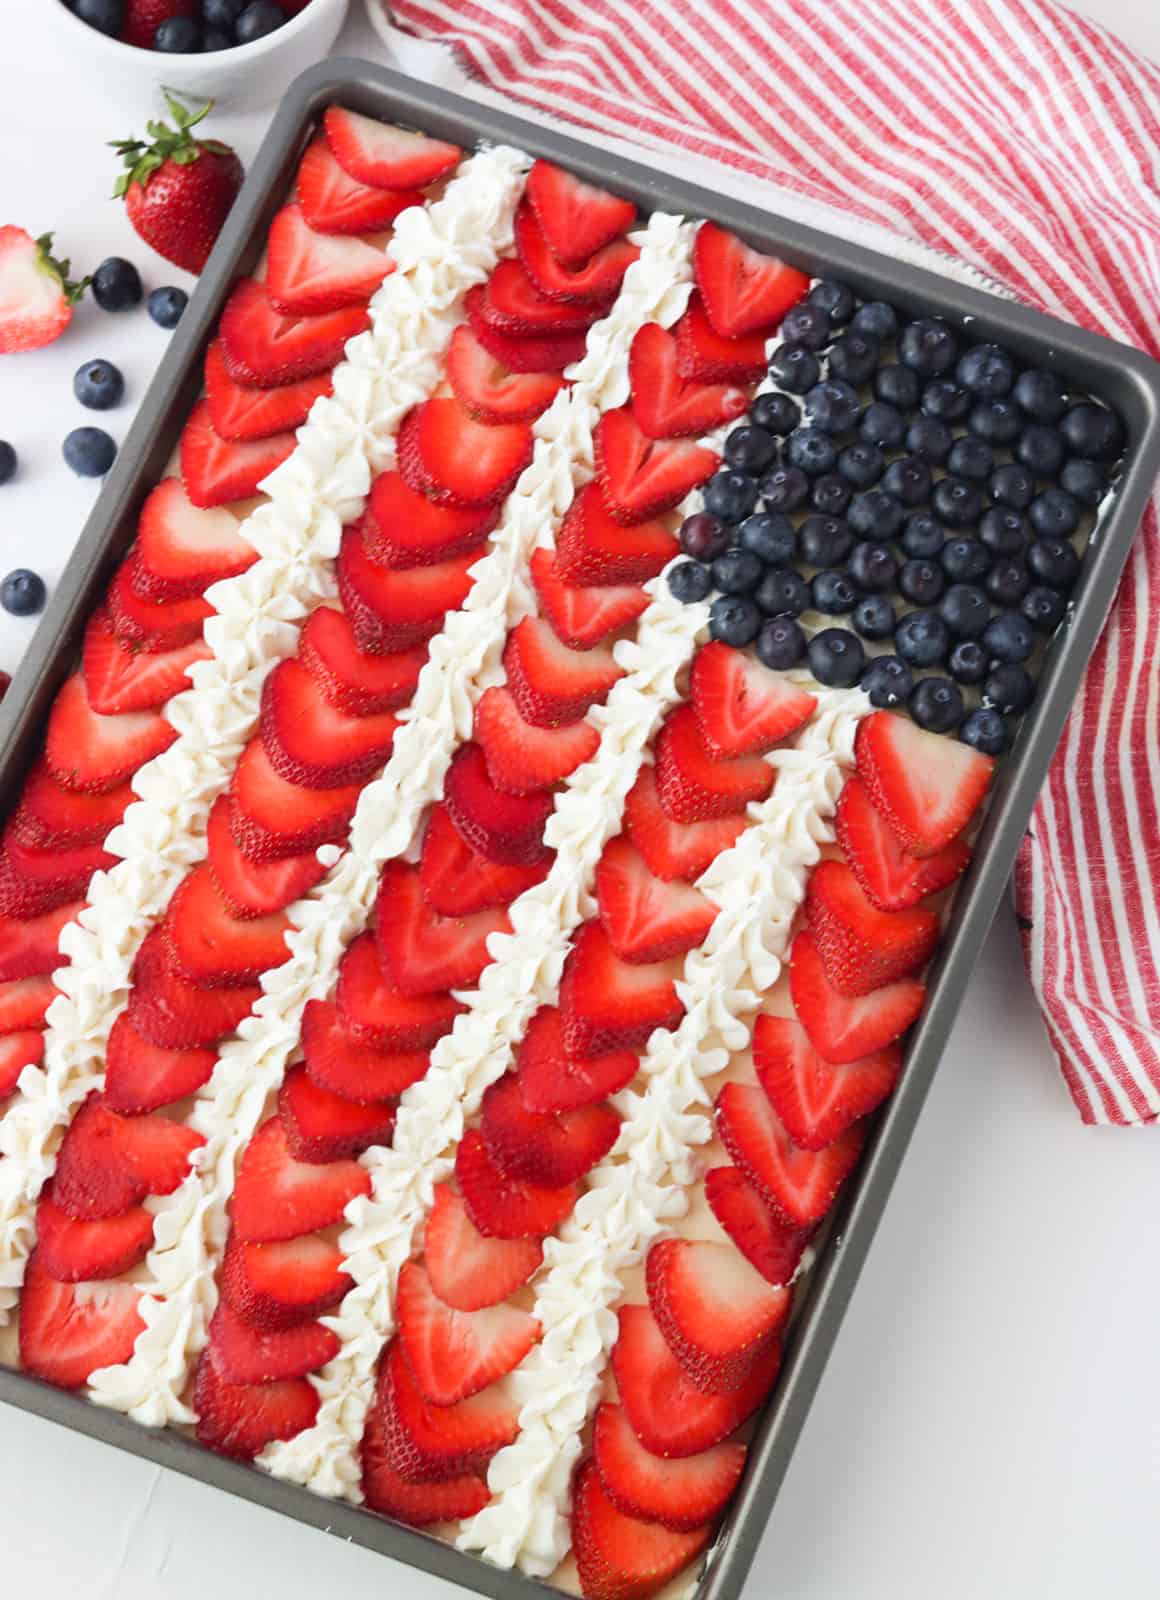 American Flag Cake ready for 4th of July